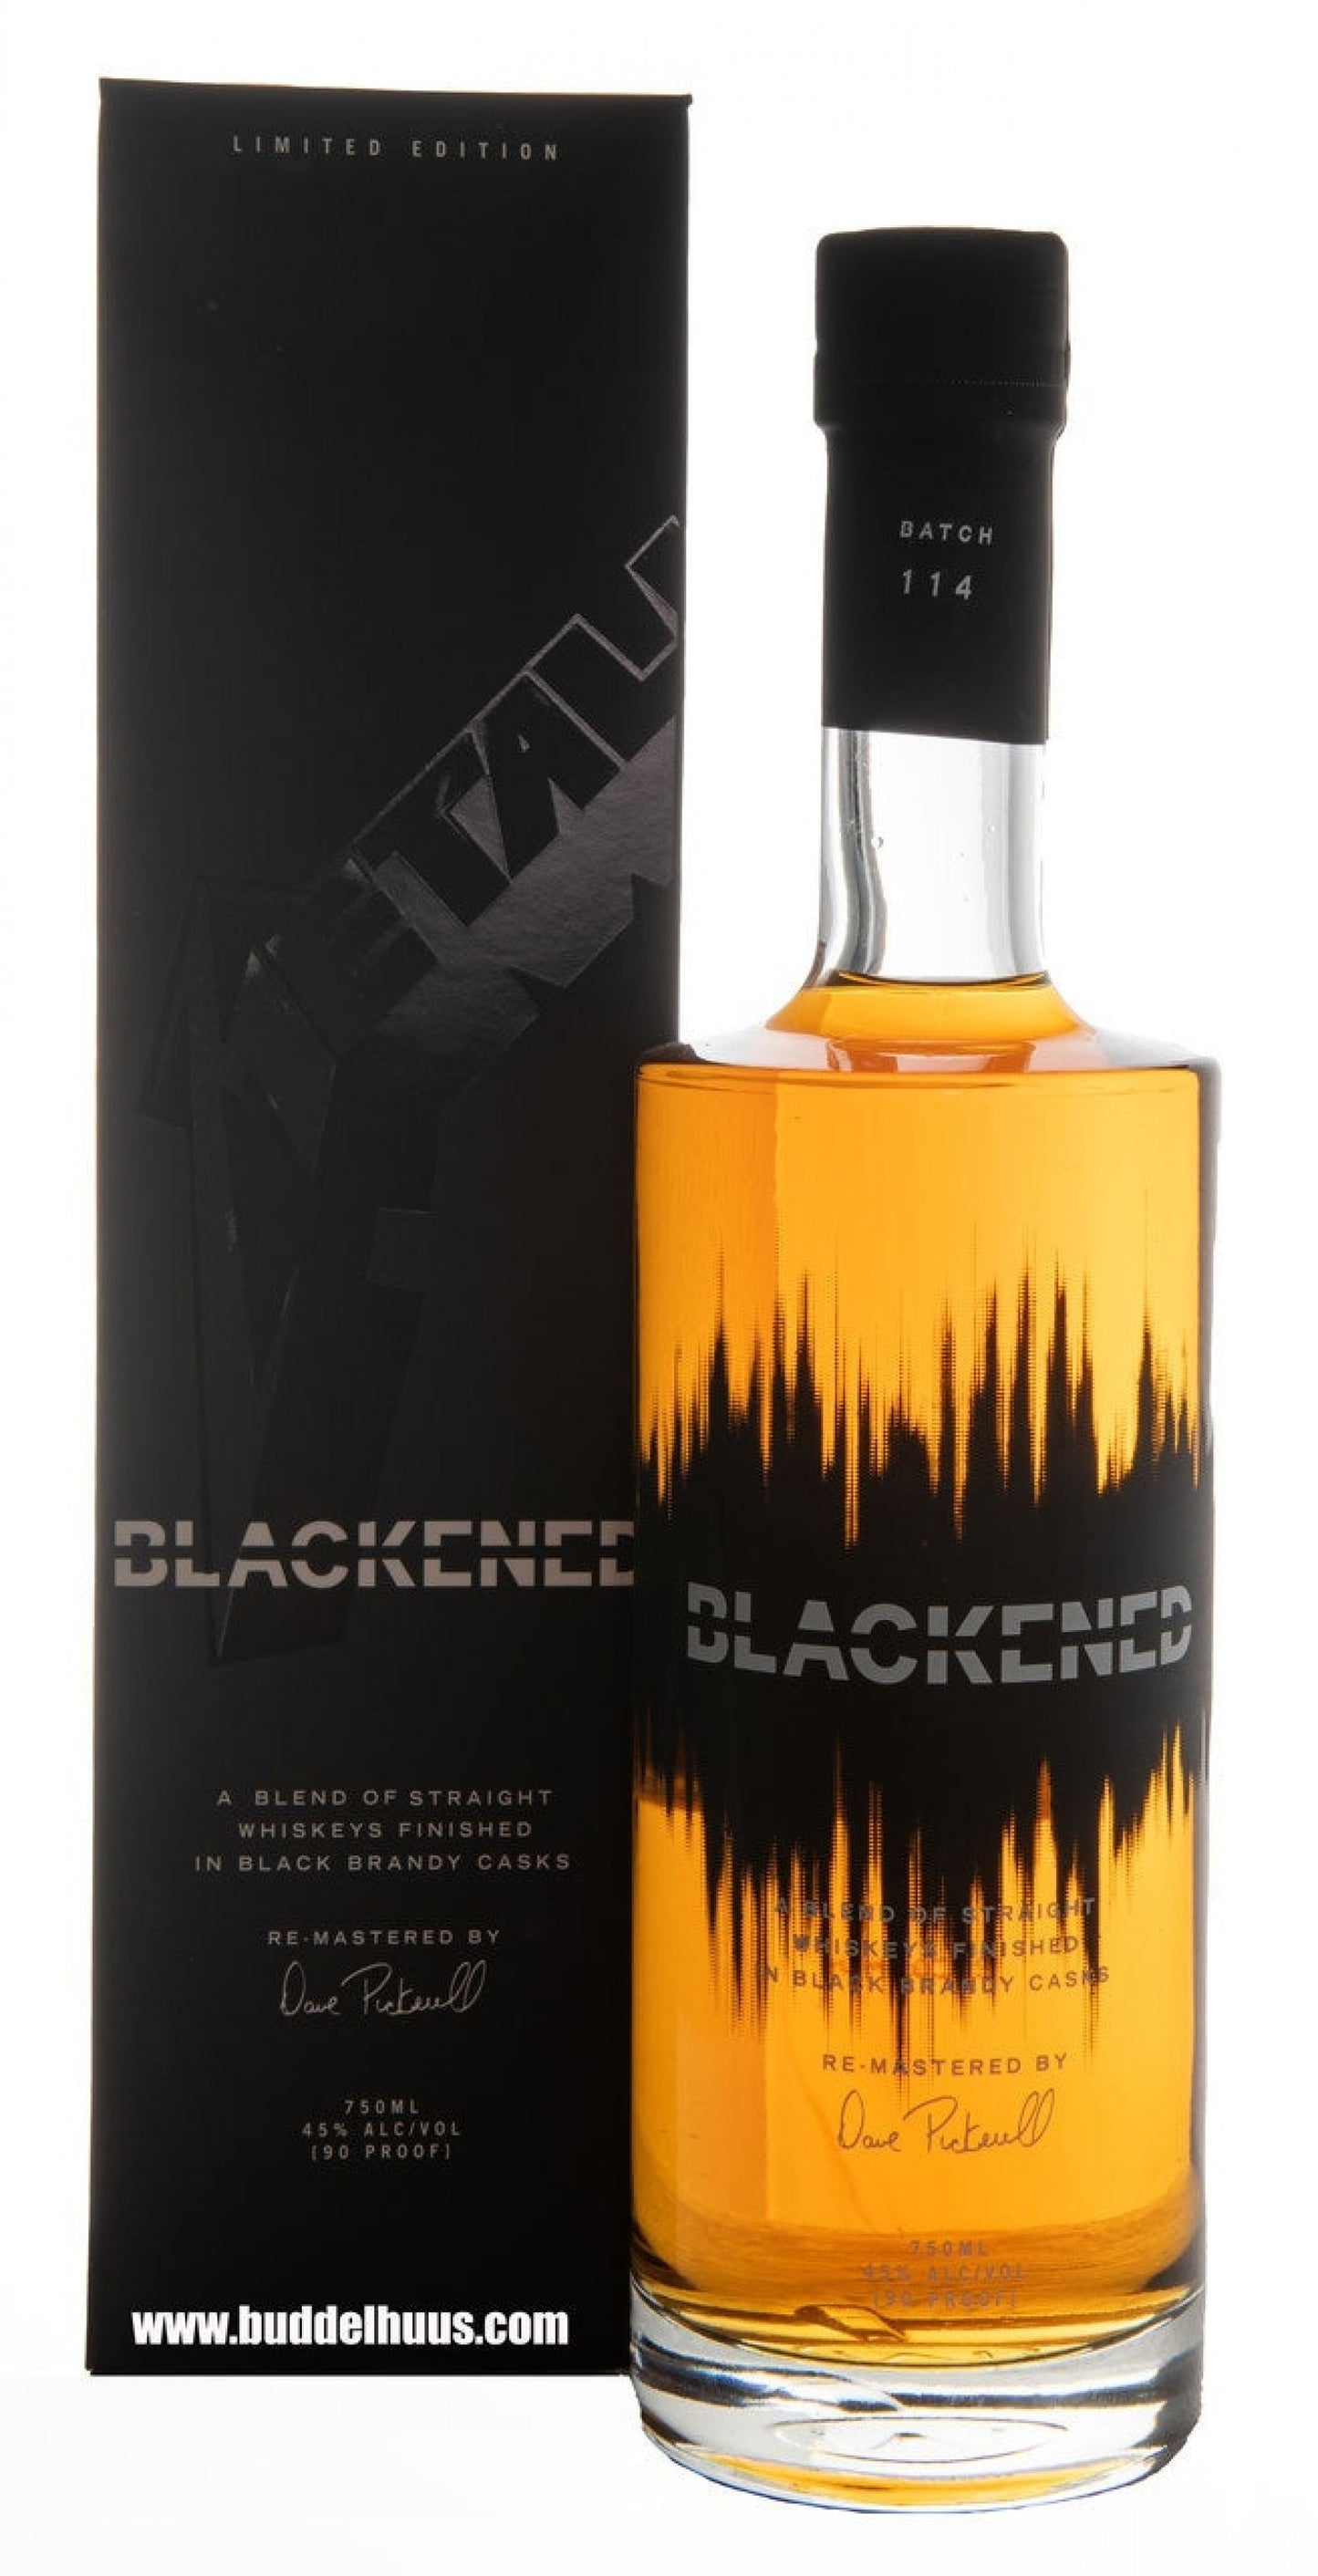 Blackened Batch 114 Special Edition